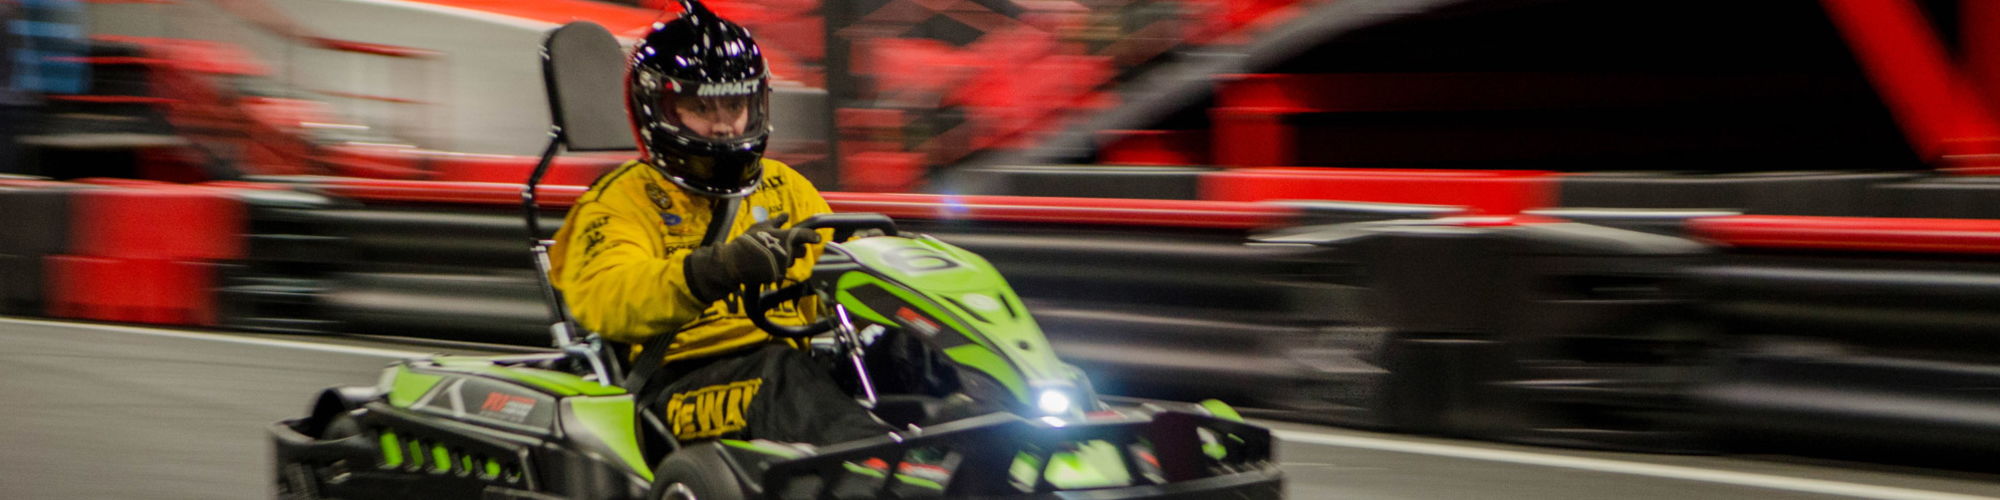 R1 Indoor Karting, LLC cover image